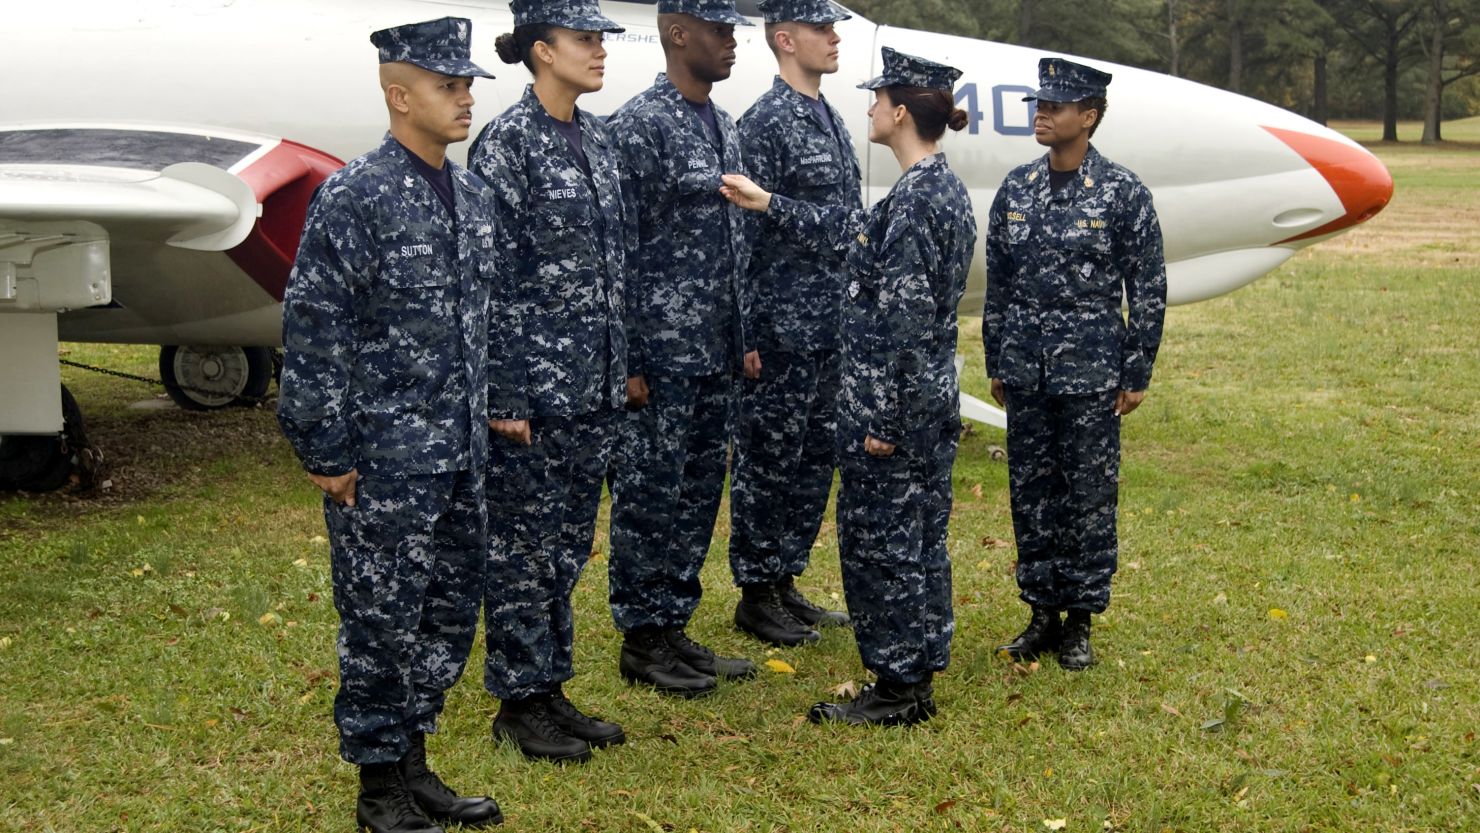 The Navy will phase out the blue camouflage working uniform beginning in October. (U.S. Navy Photo/Released)